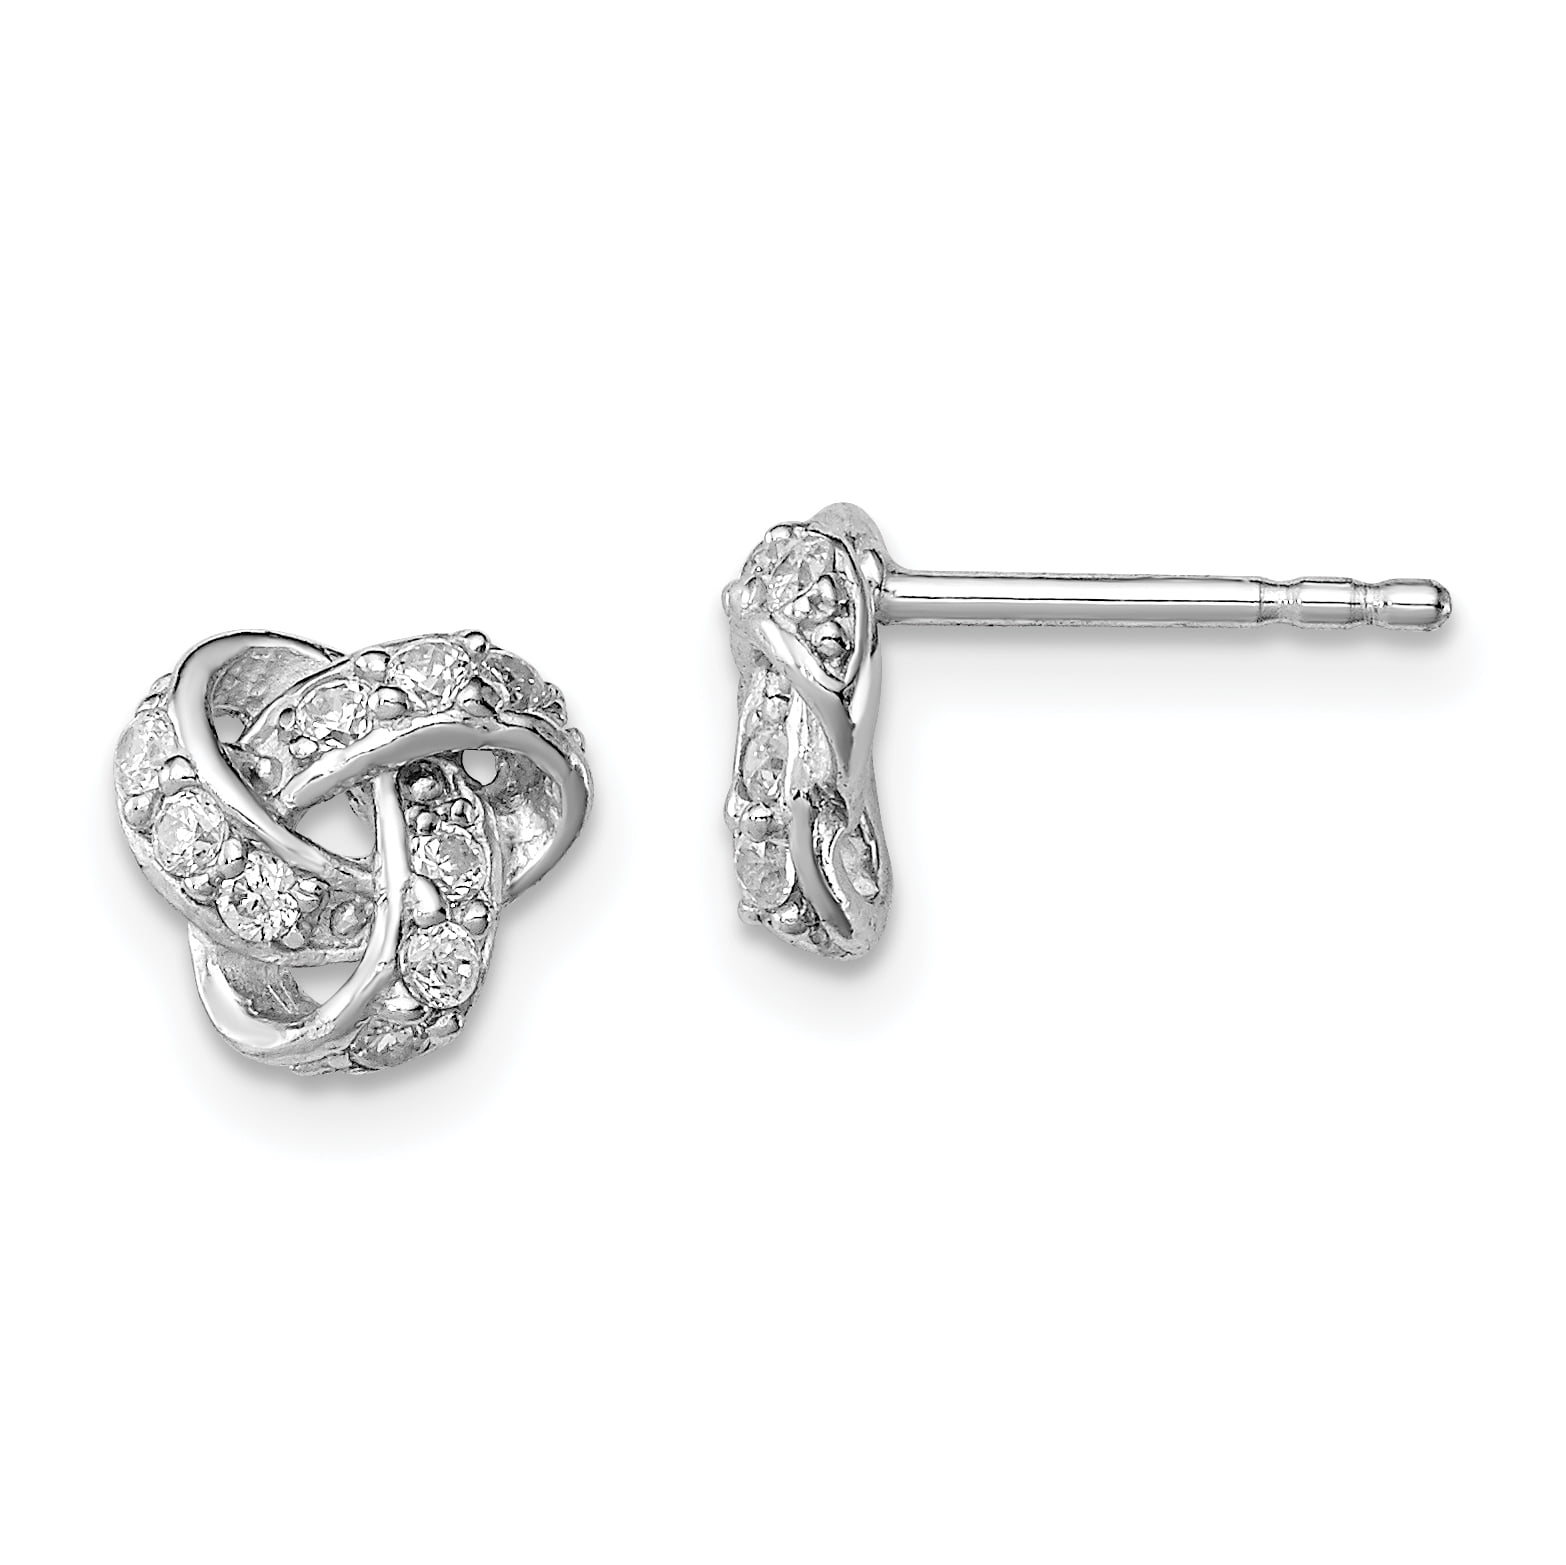 925 Sterling Silver Cubic Zirconia Cz Love Knot Post Stud Earrings Fine Jewelry For Women Gifts For Her